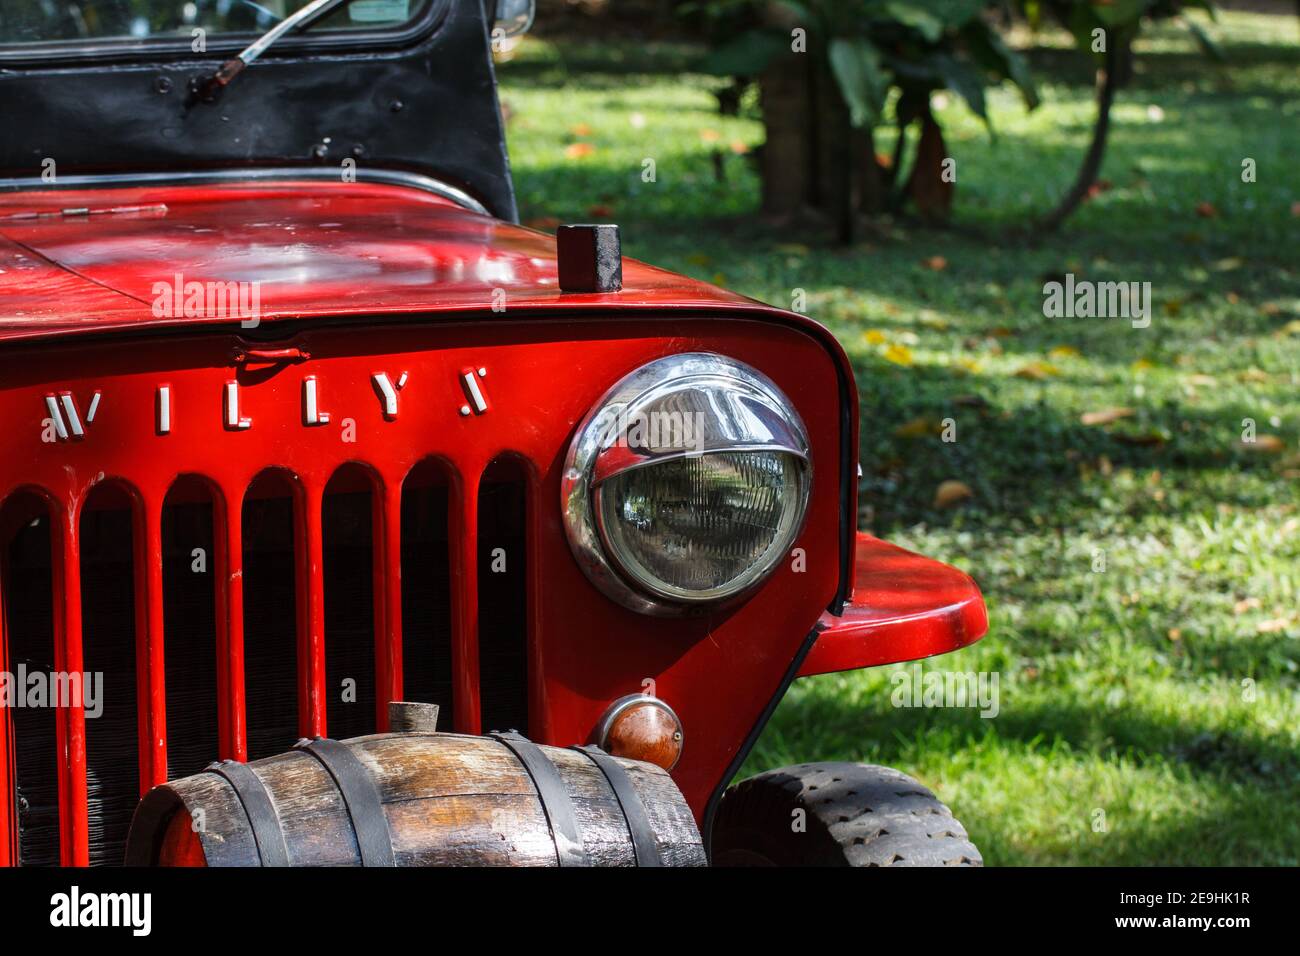 Jeep Willys front of the car Stock Photo